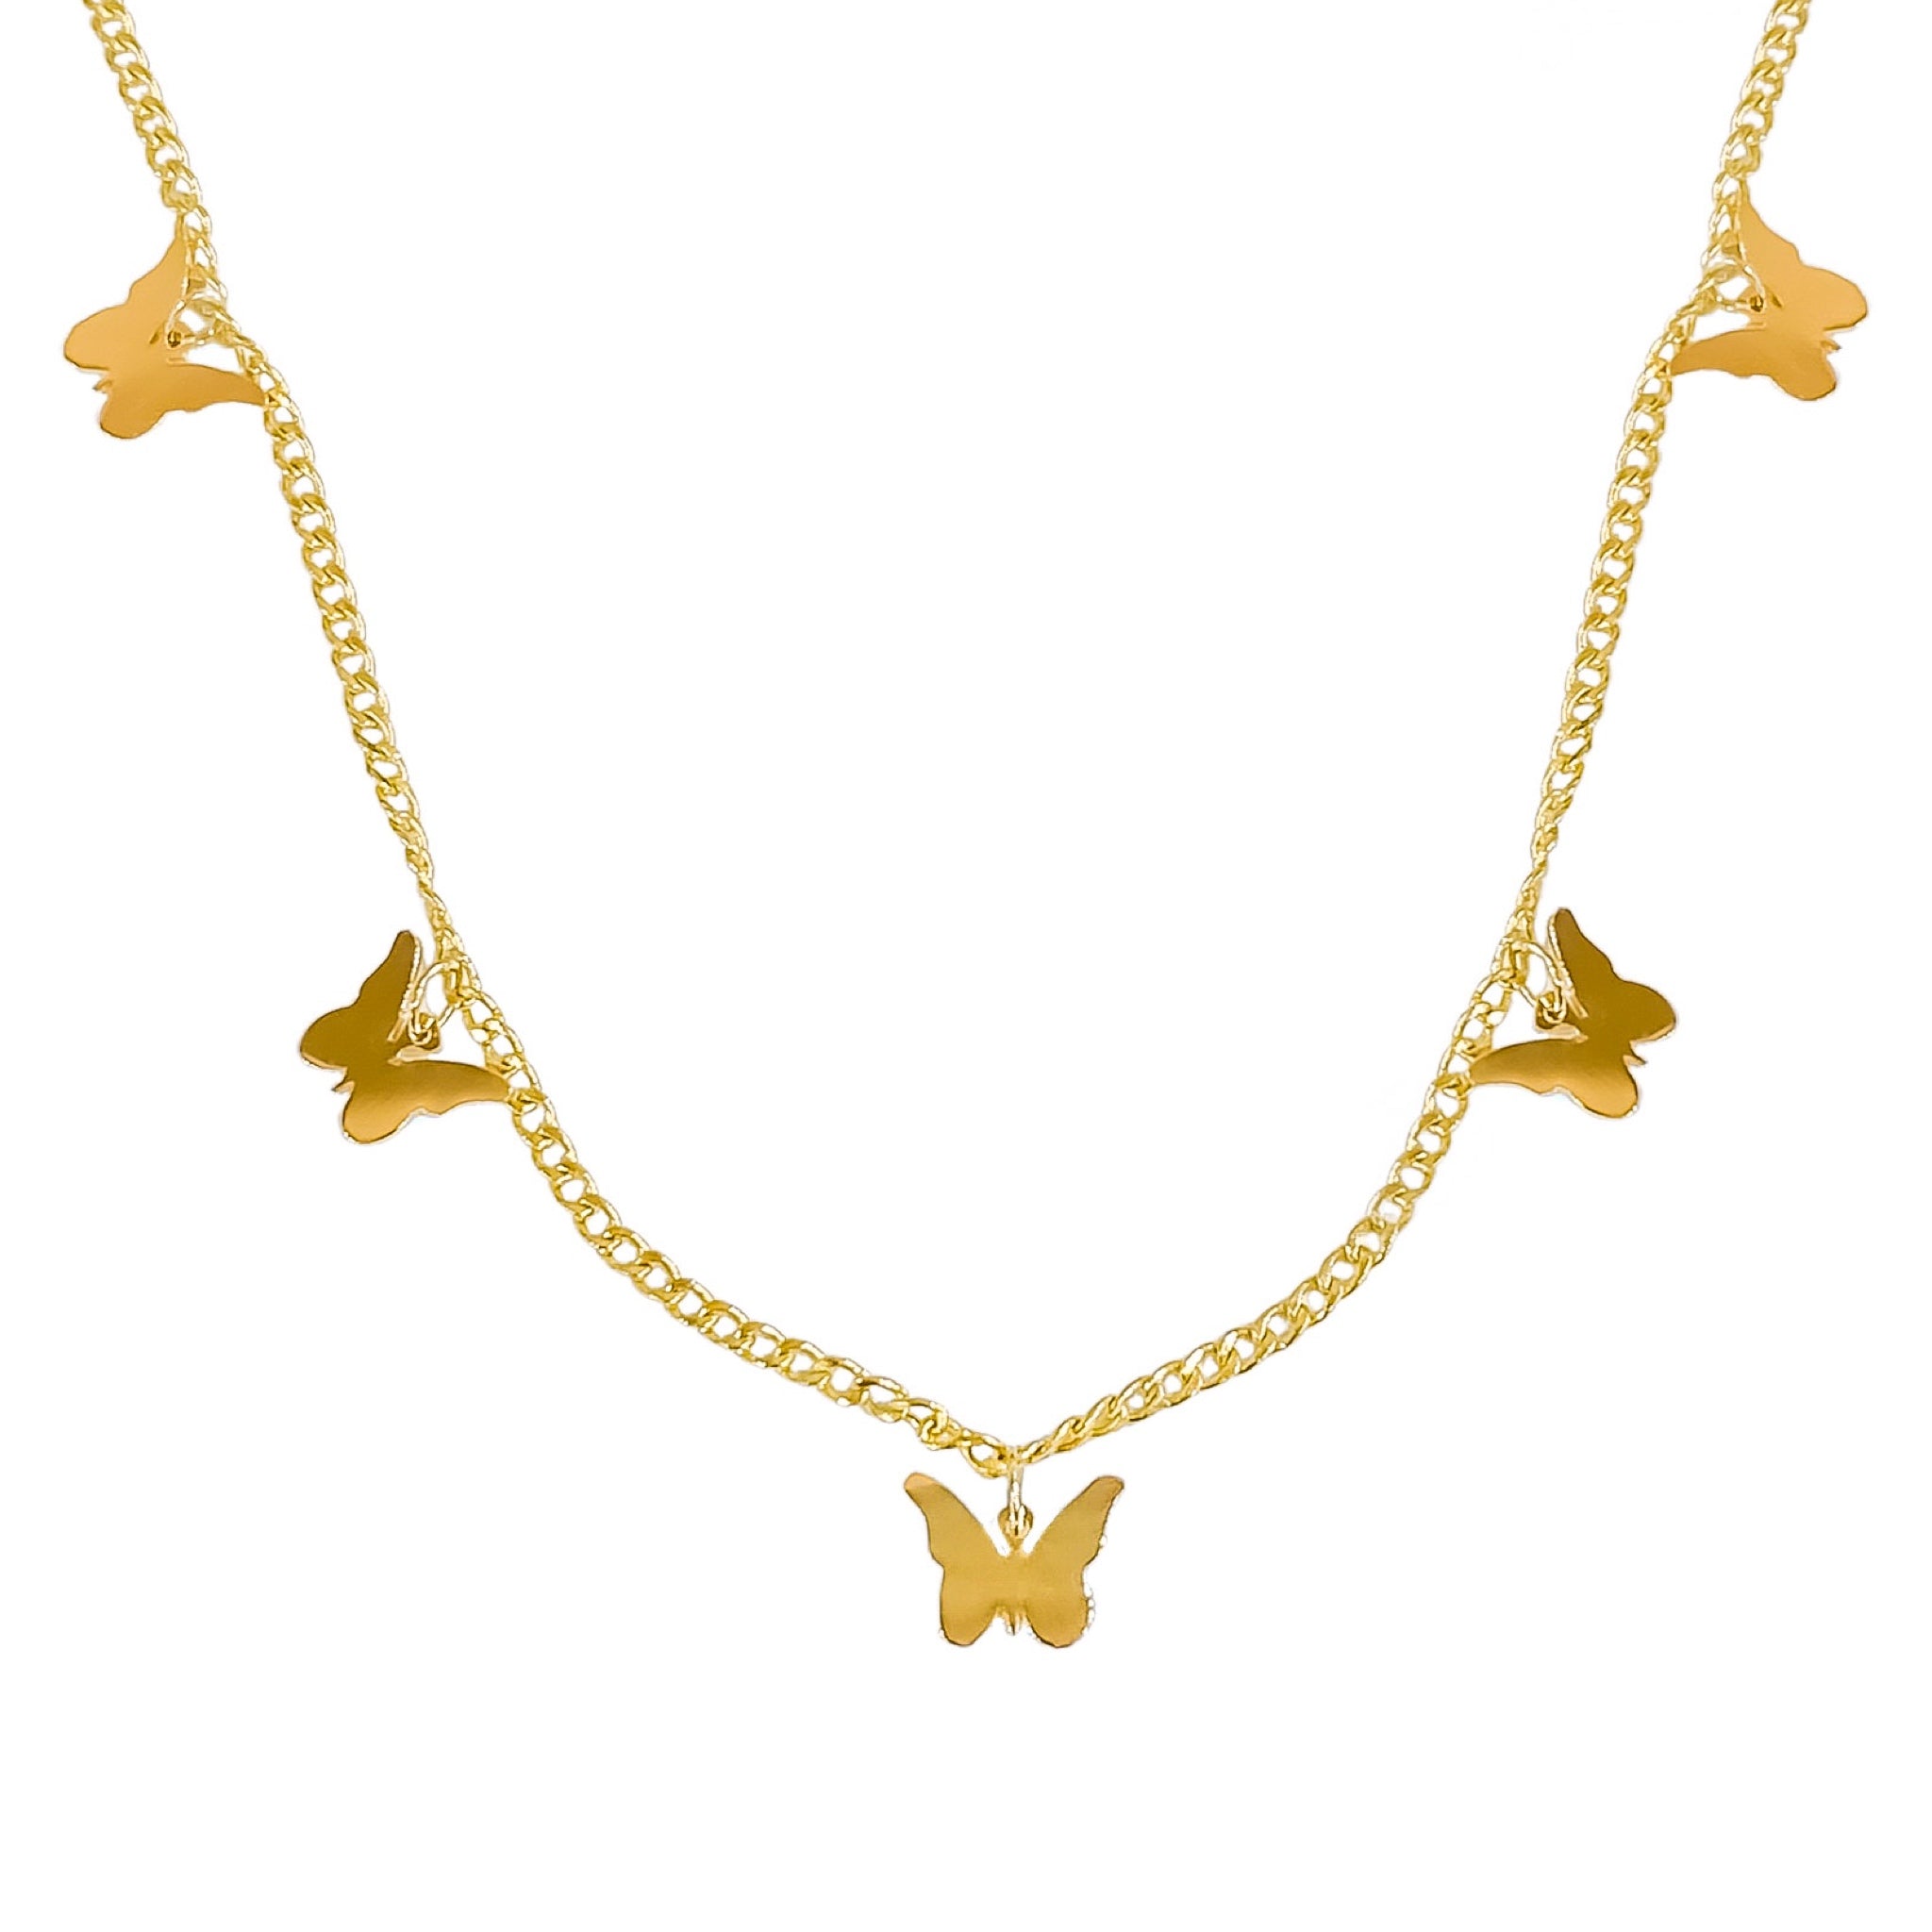 14K YELLOW GOLD BUTTERFLY CHARMS NECKLACE